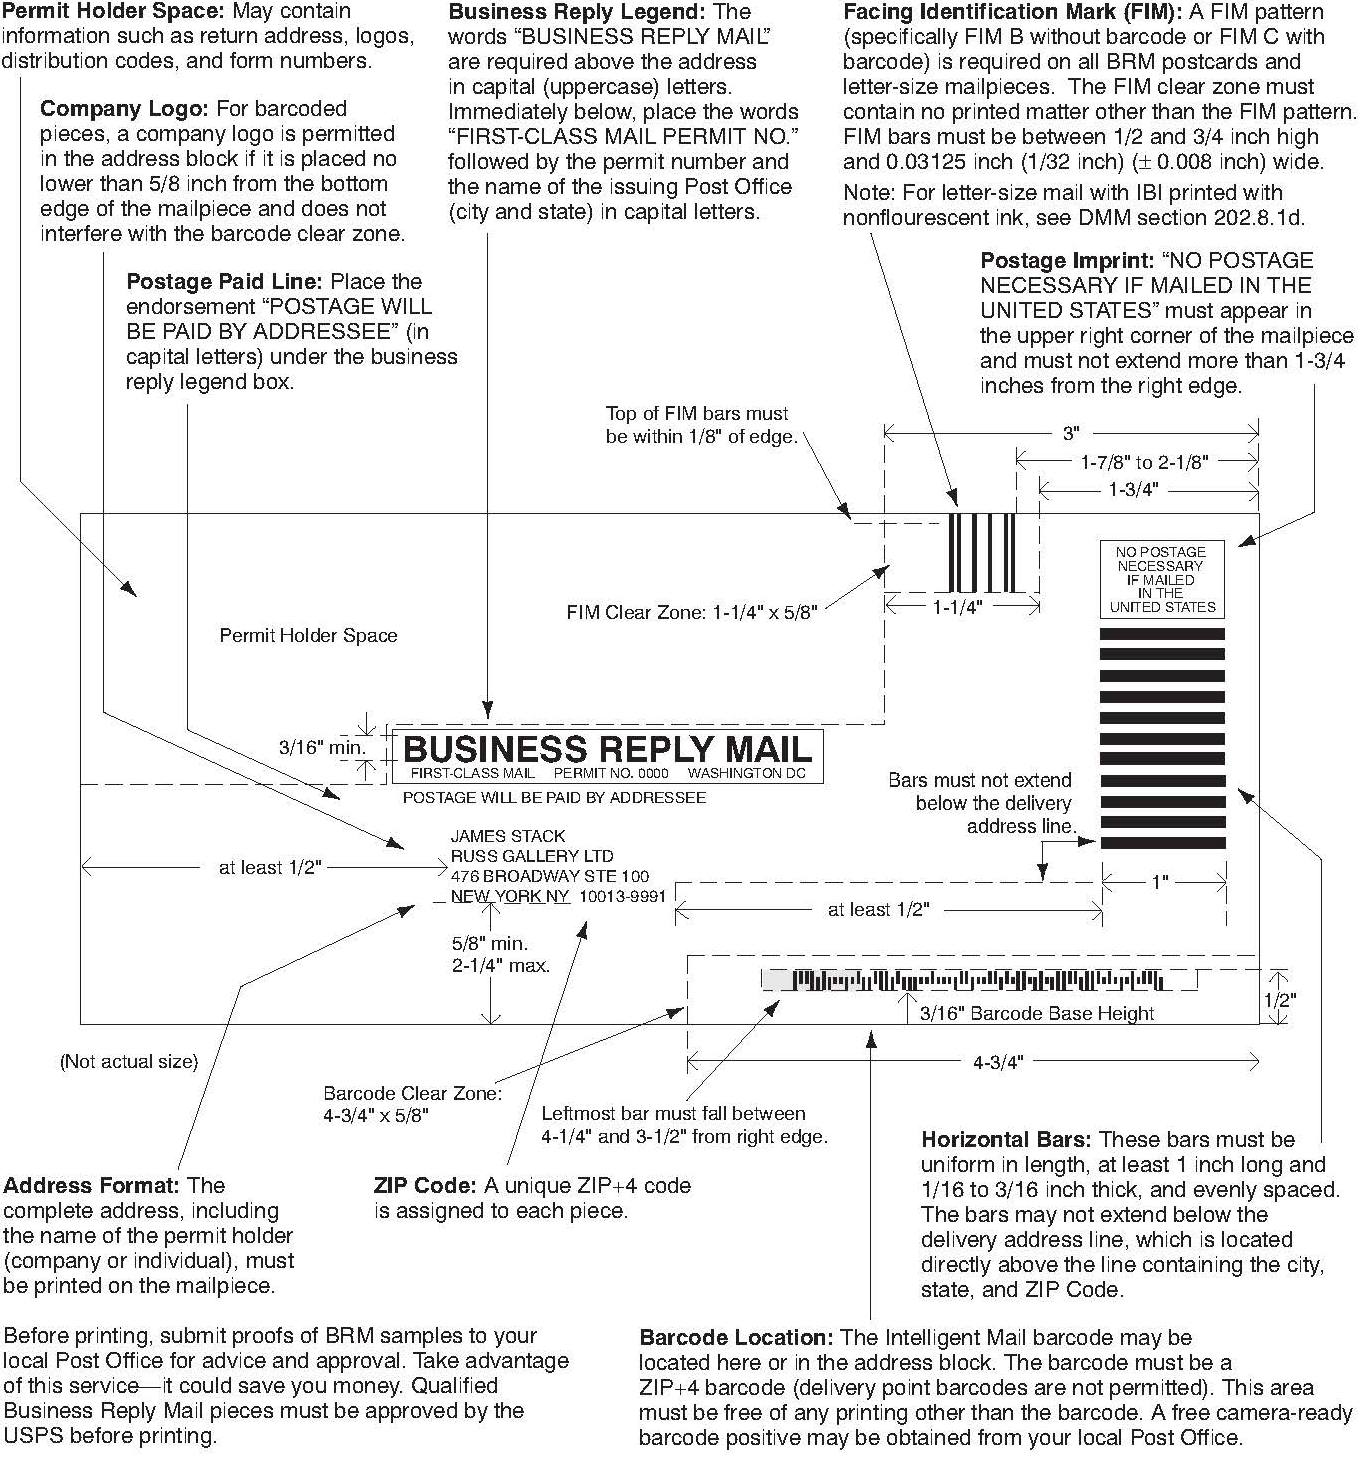 Business reply mail layout guidelines.